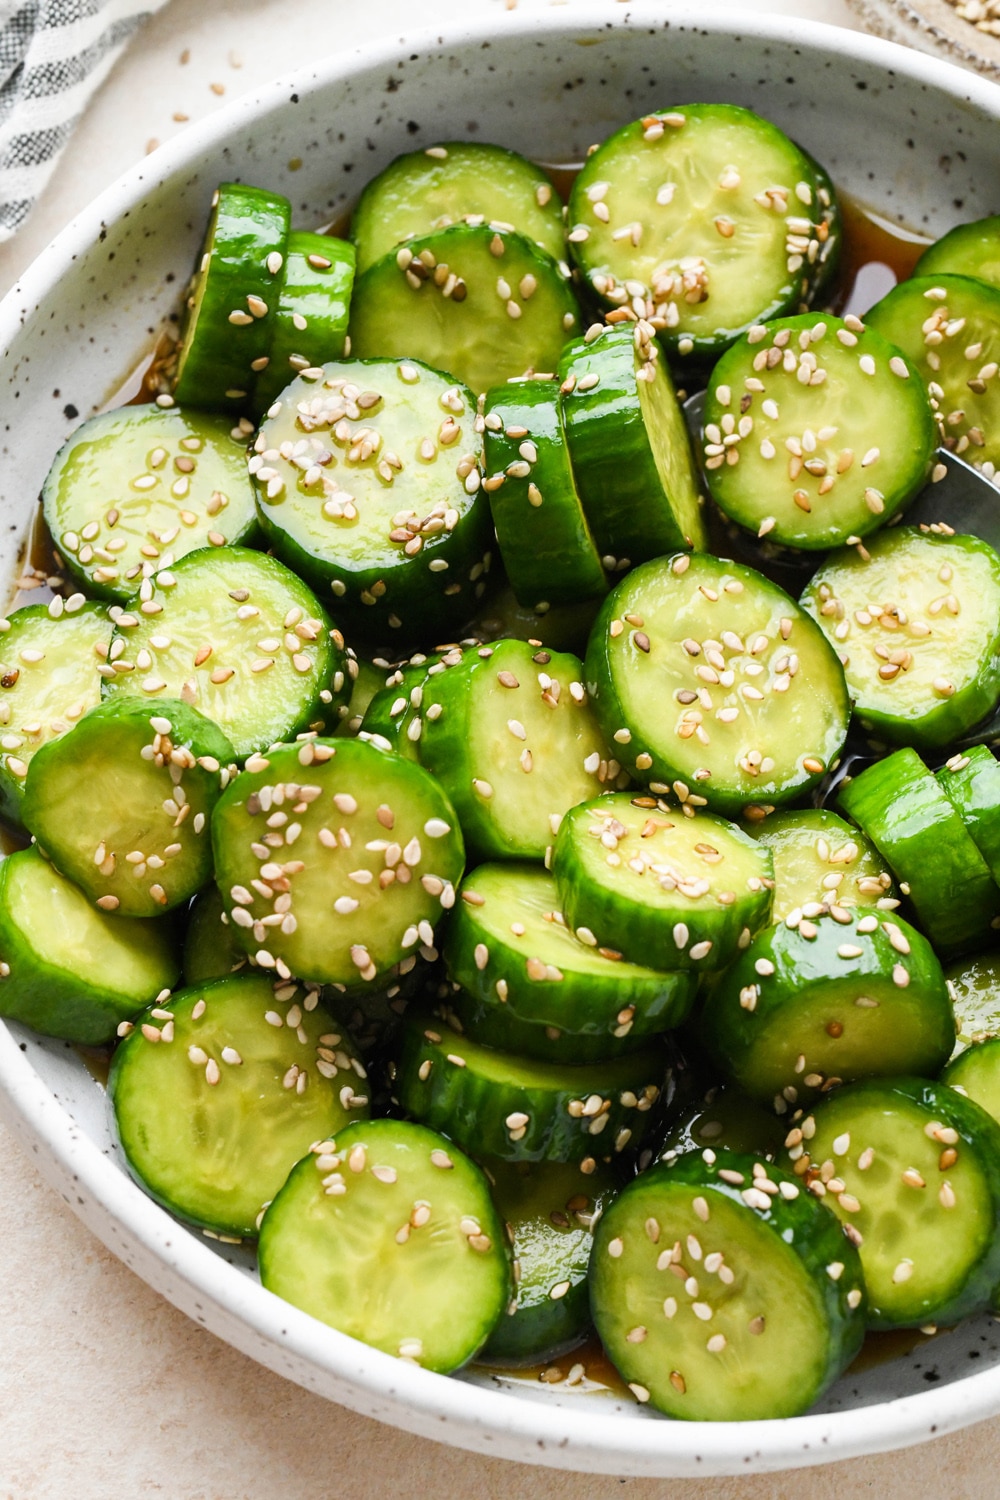 Angled view of prepared cucumber sesame salad in a shallow white speckled ceramic serving bowl, topped with sesame seeds.